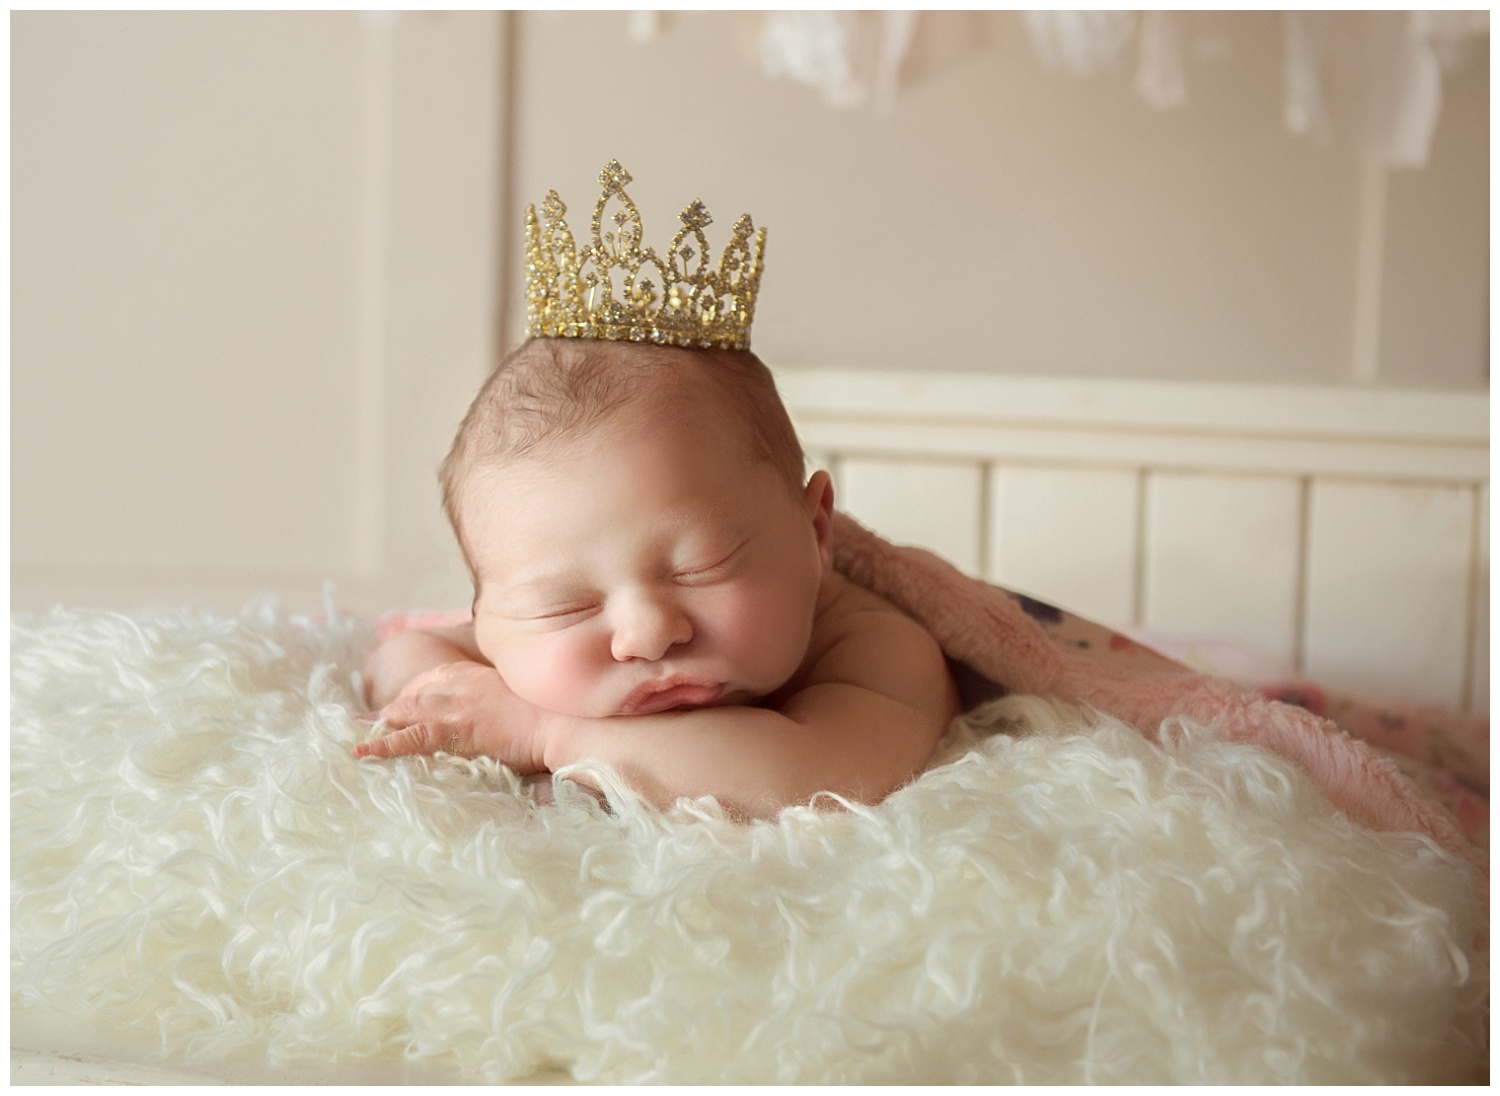 Minnesota Posed Newborn Photographers | Baby posed on a bed with a crown